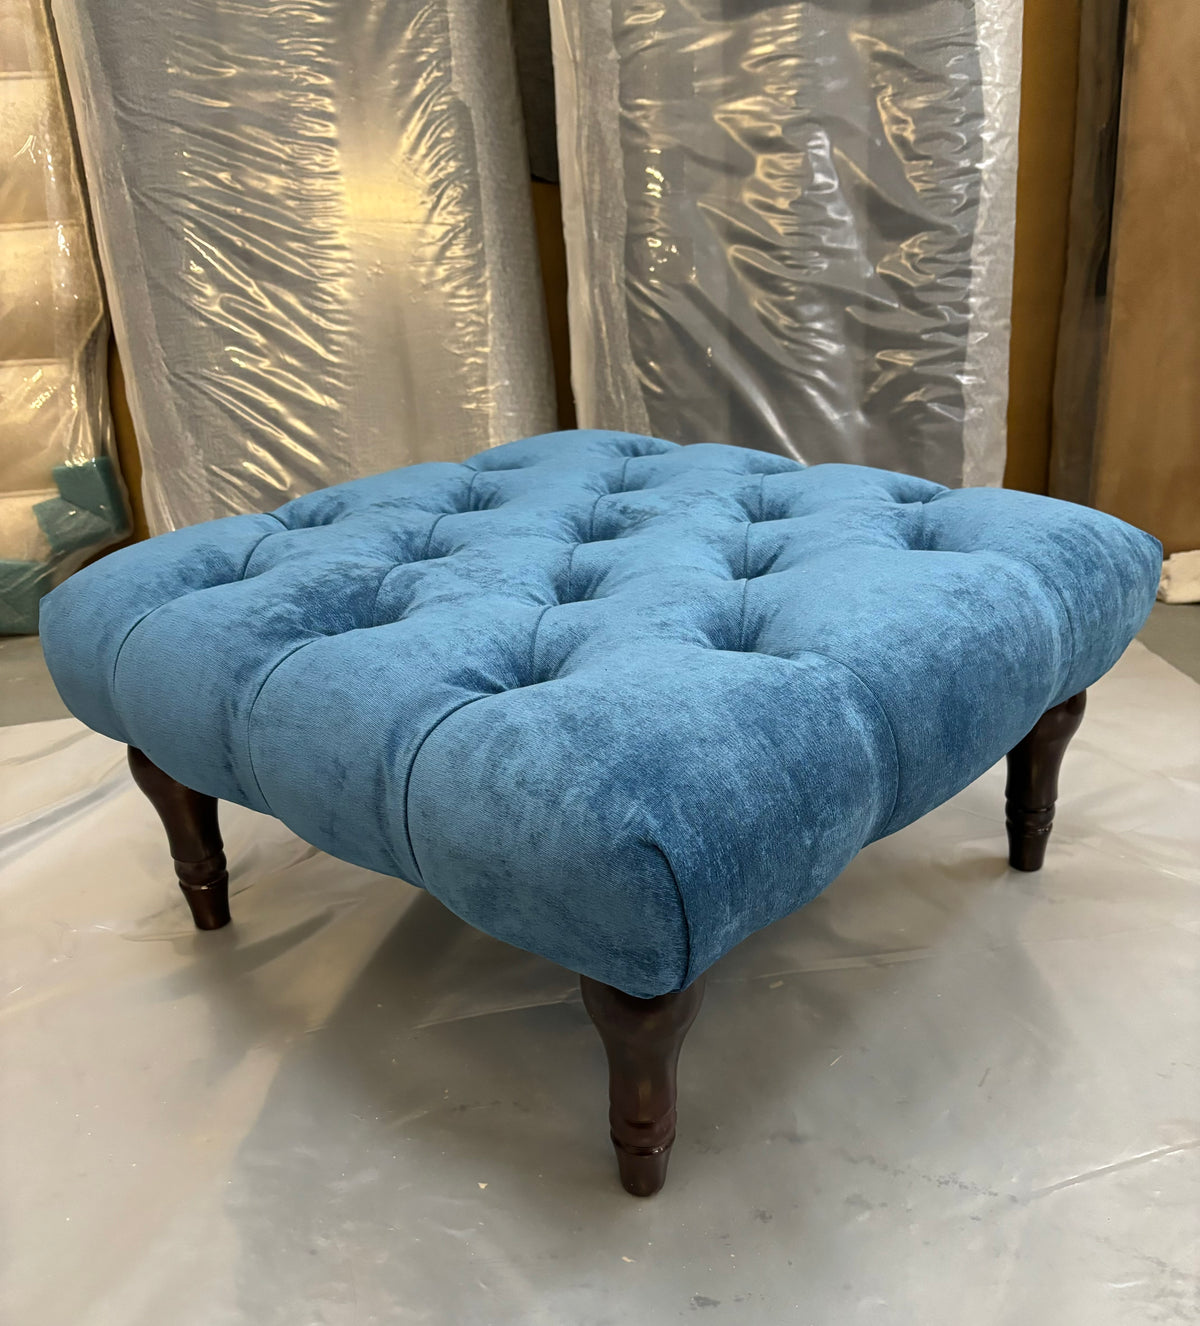 60cm x 60cm Chesterfield Footstool Coffee Table